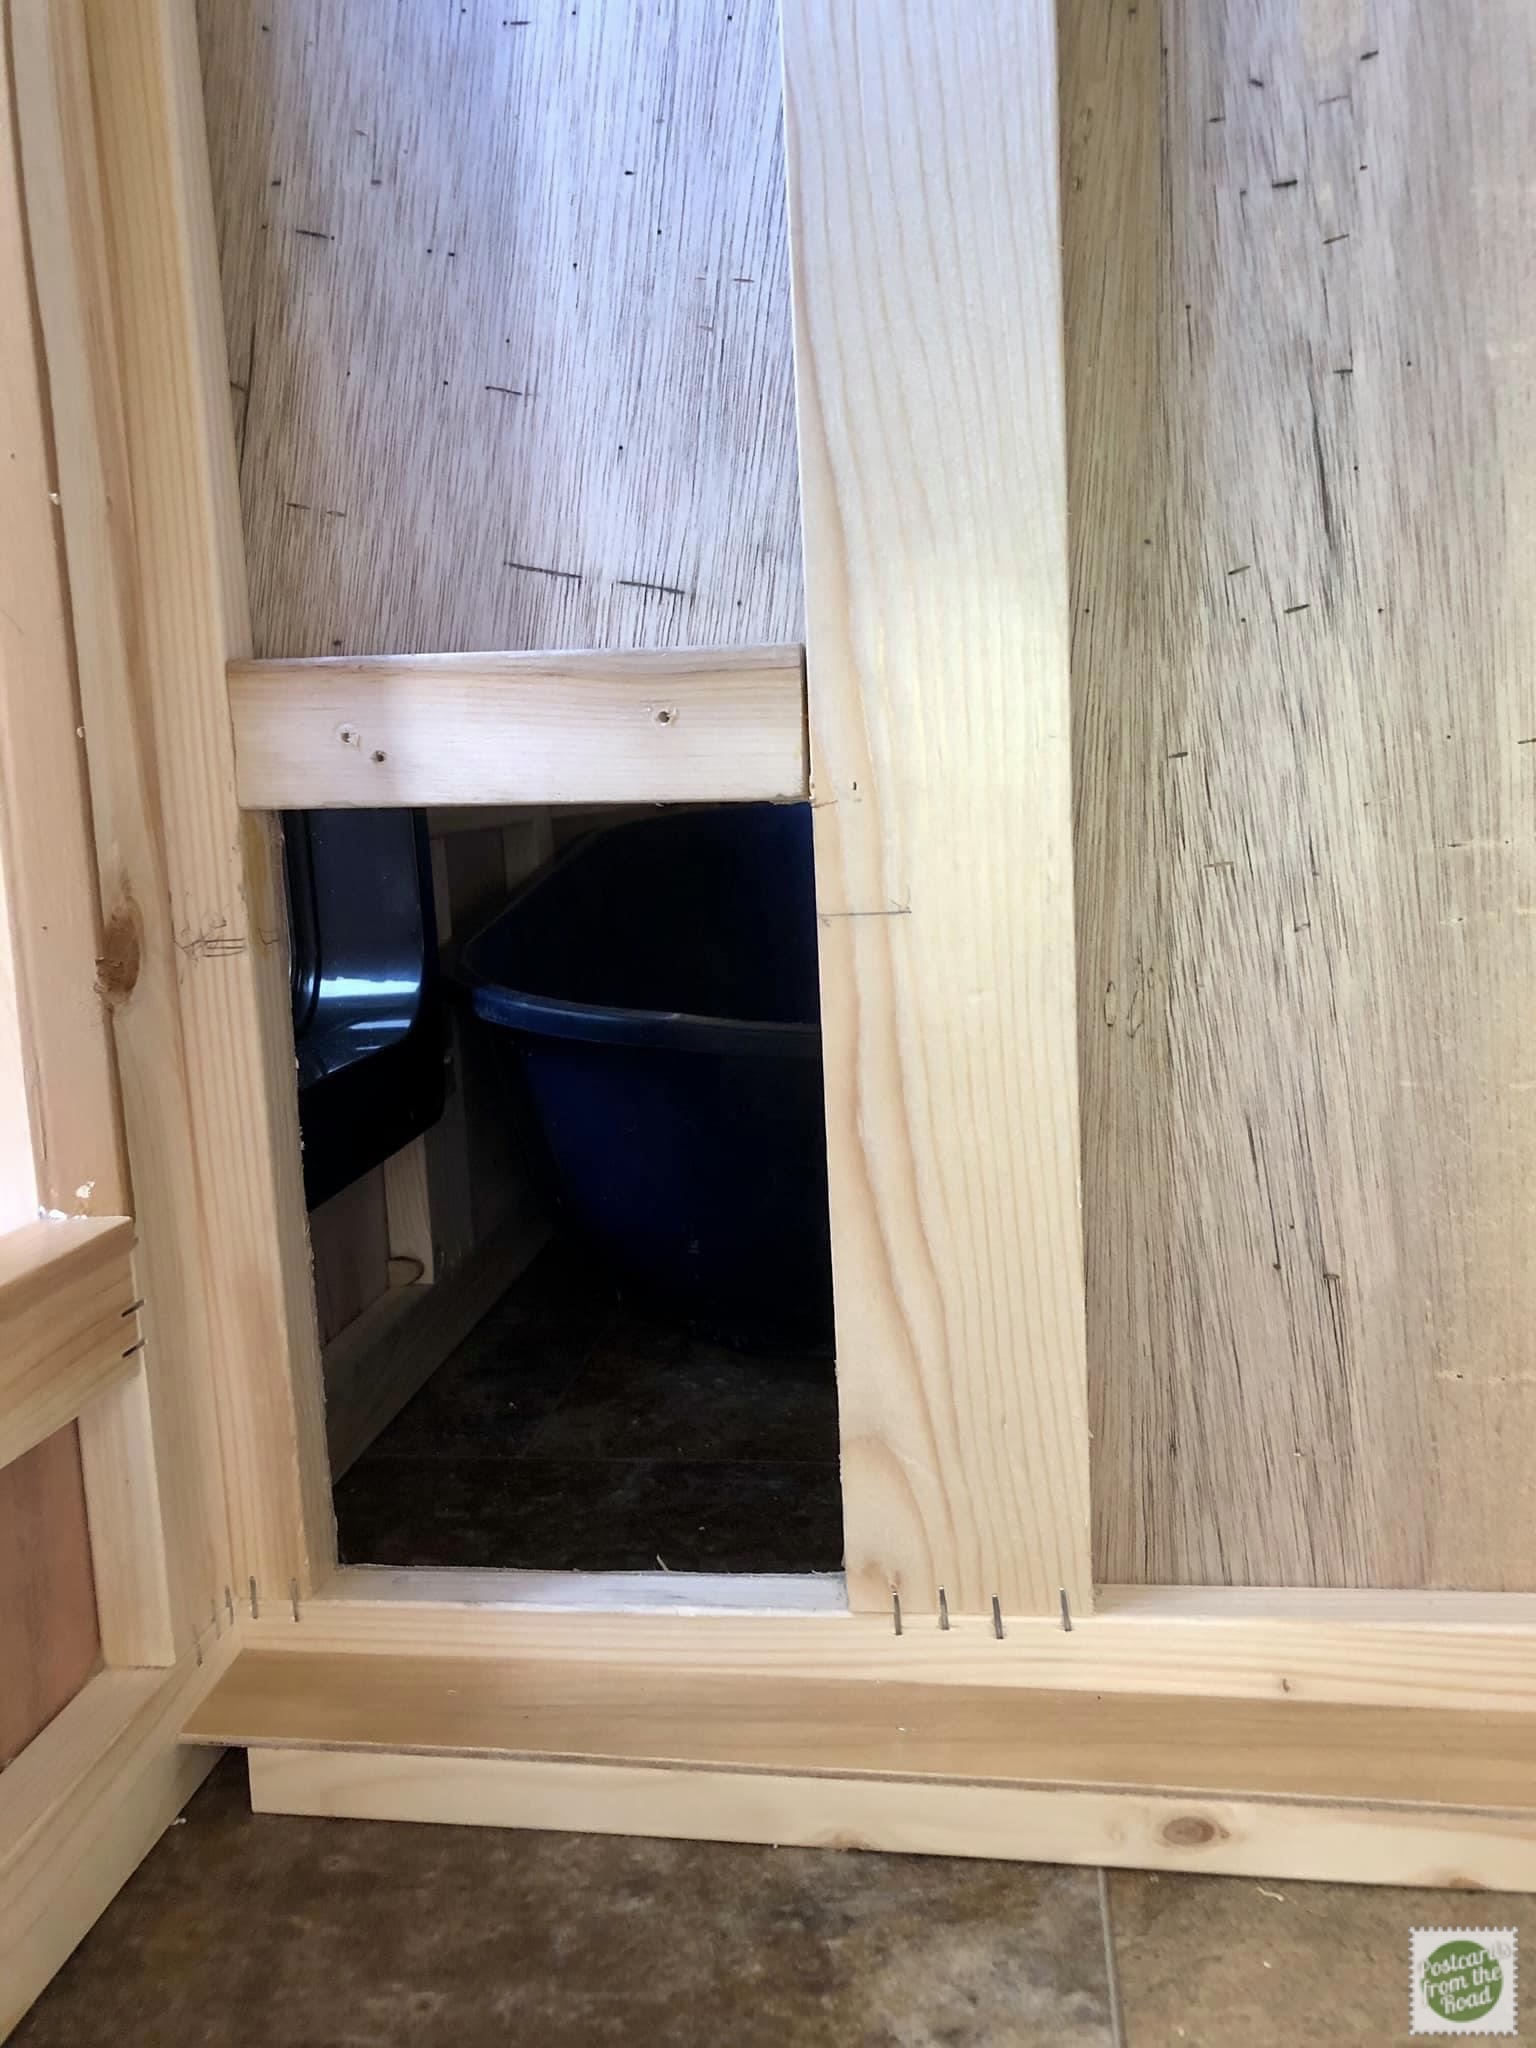 Inside the cabinet looking at the opening cut to the area inder the step.